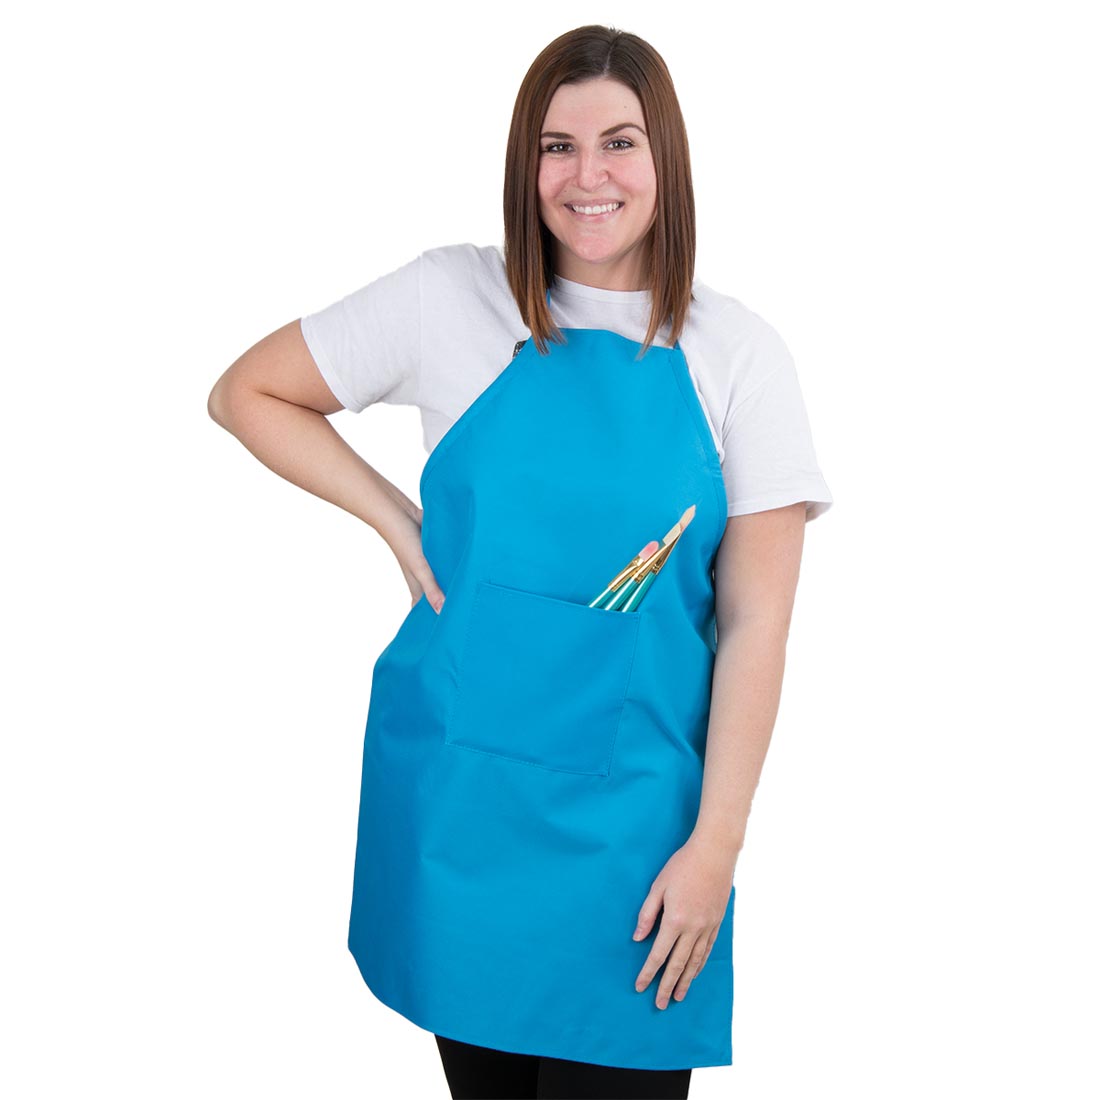 Royal & Langnickel Crafter's Choice Apron, worn by a female, with brushes sticking out of the pocket